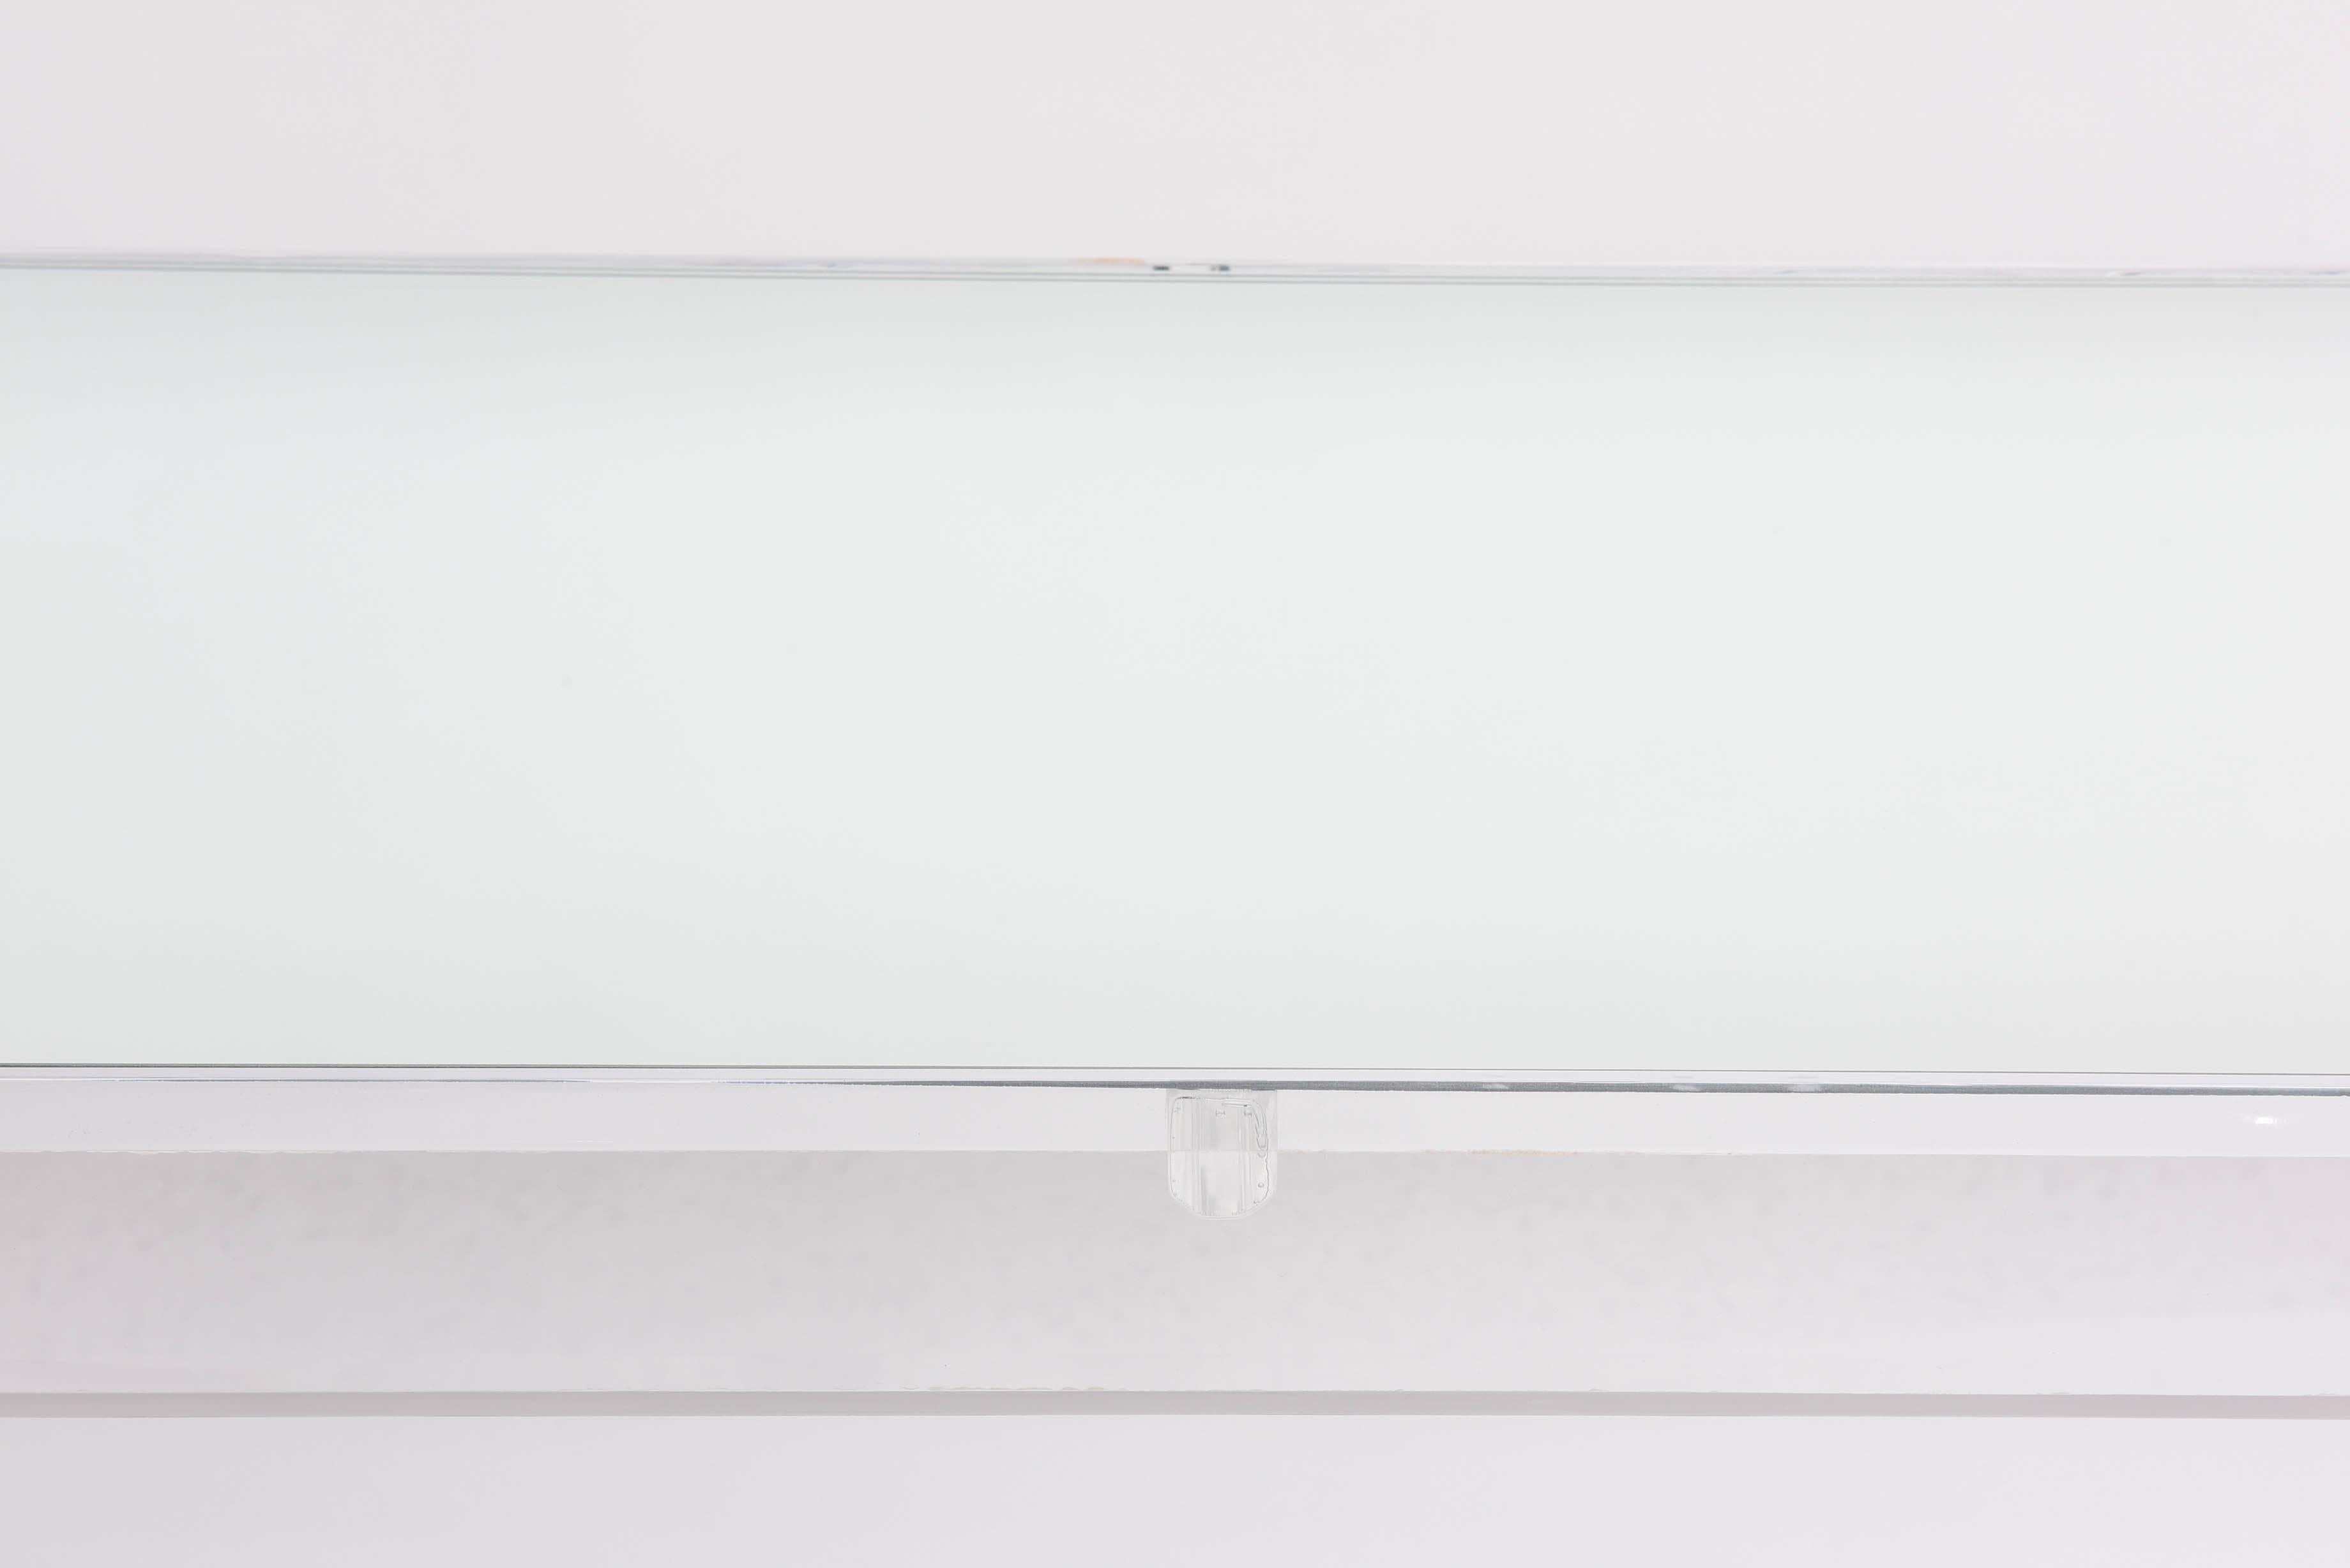 Bespoke Lucite and Mirror Console Table, American, Modern 1